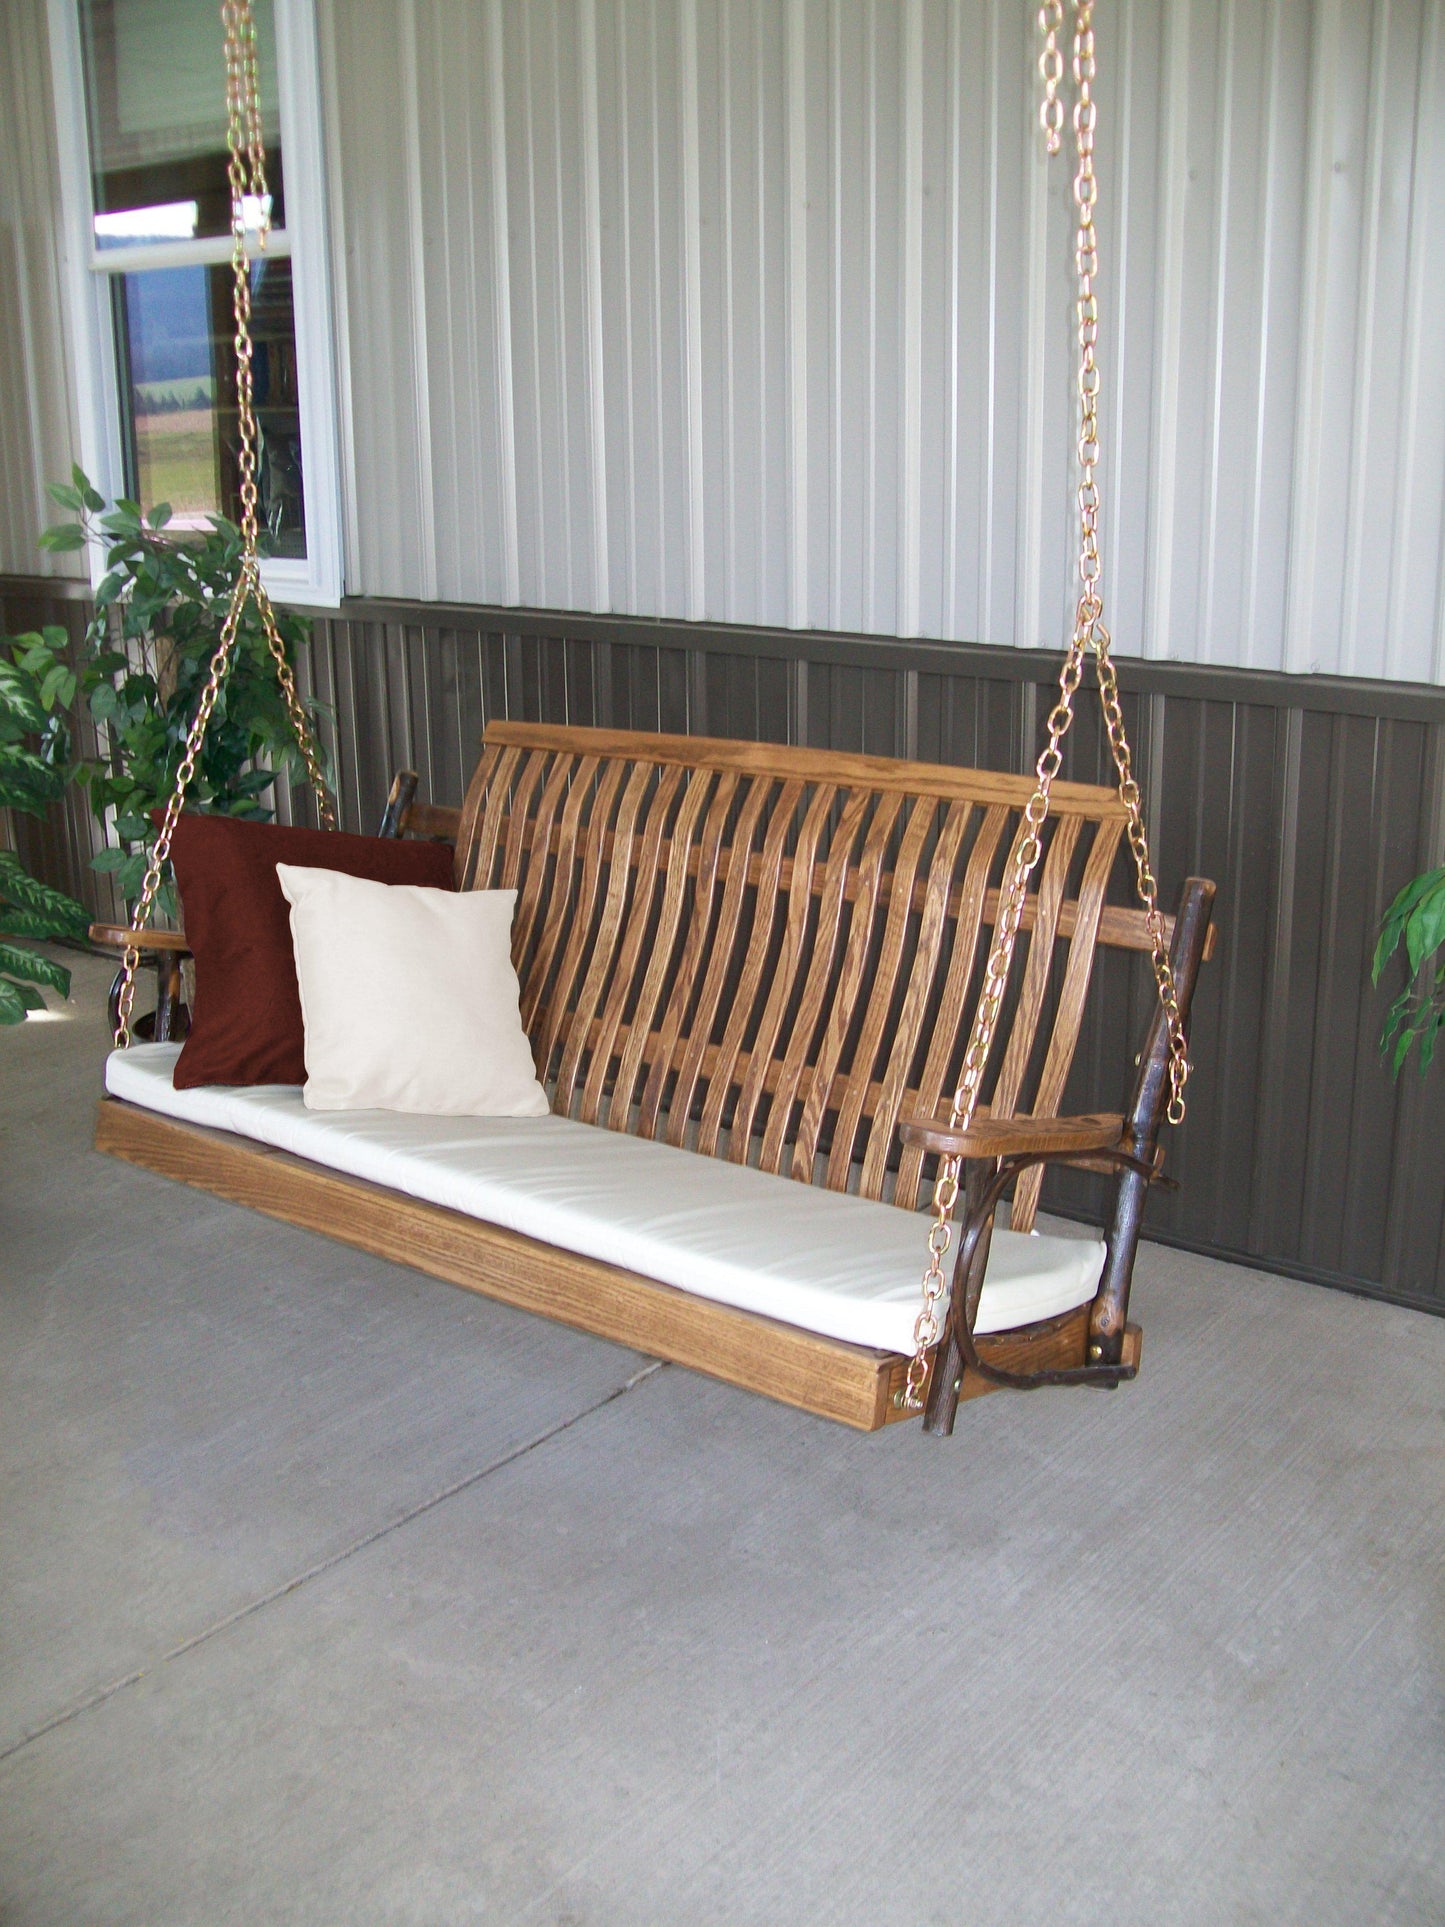 A&L Furniture Co. Amish Bentwood 5' Hickory Porch Swing - LEAD TIME TO SHIP 4 WEEKS OR LESS